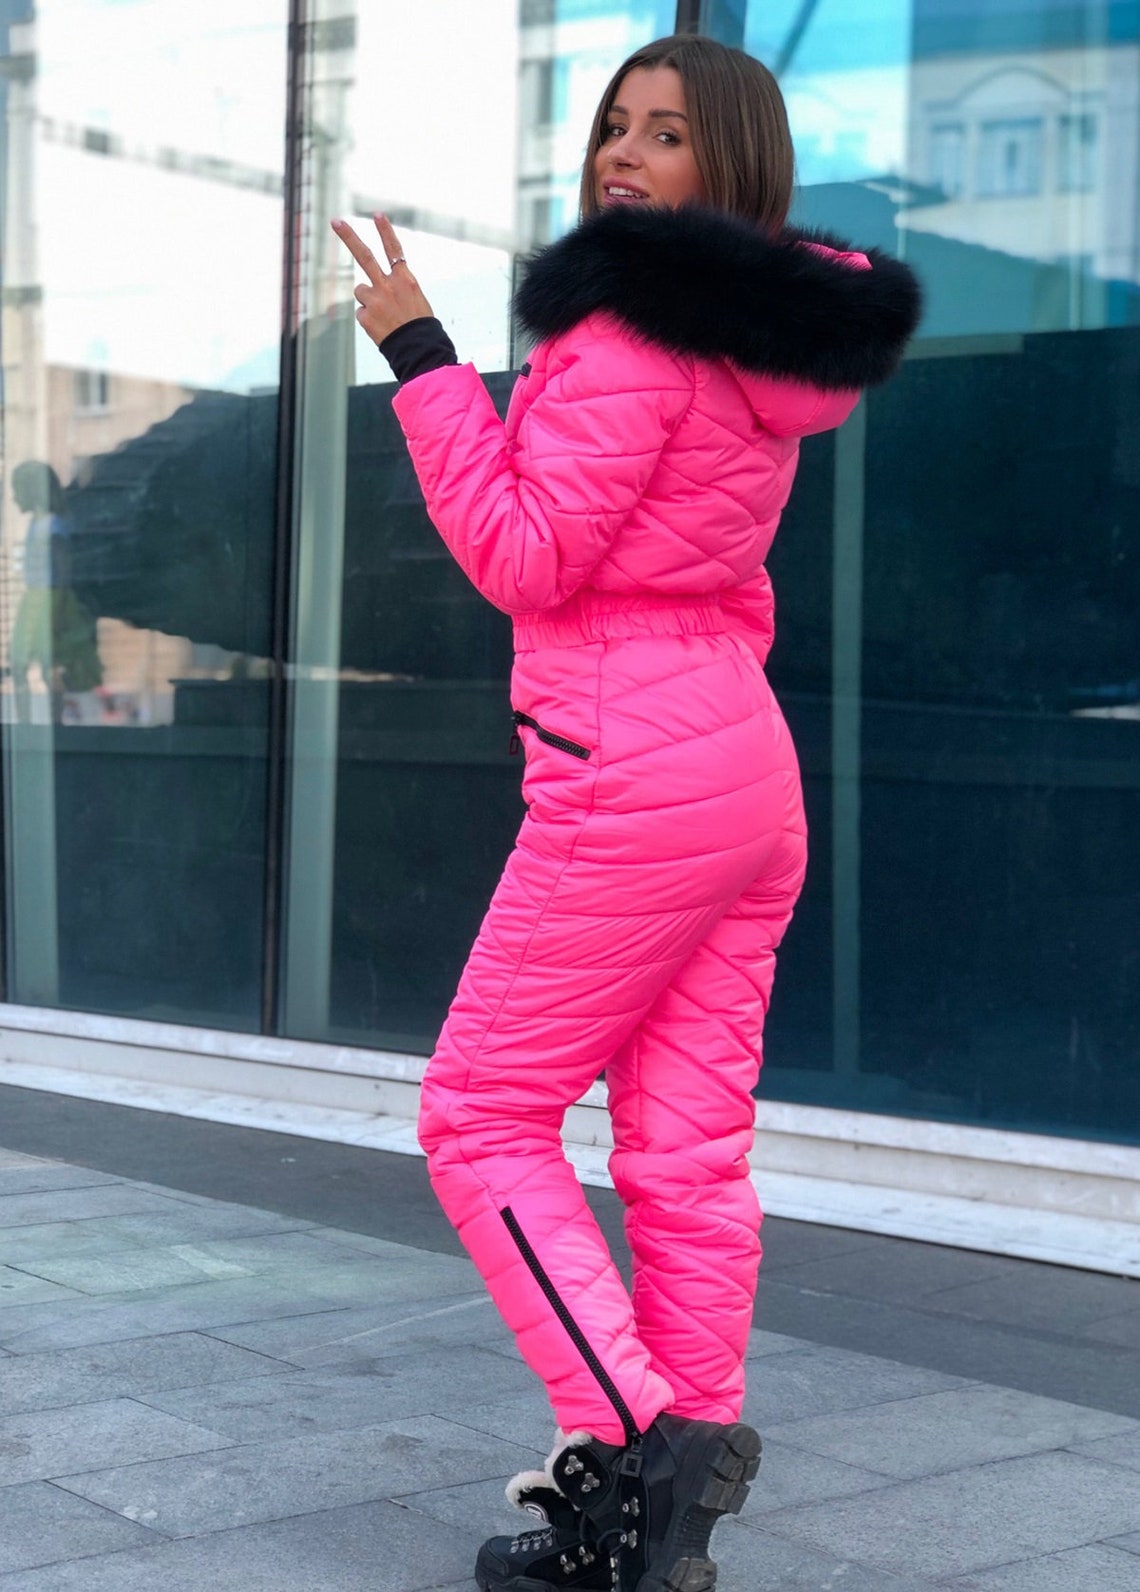 Ski Fitted Belted Ski Suit With Hoodzip Pockets Ski Suit | Etsy